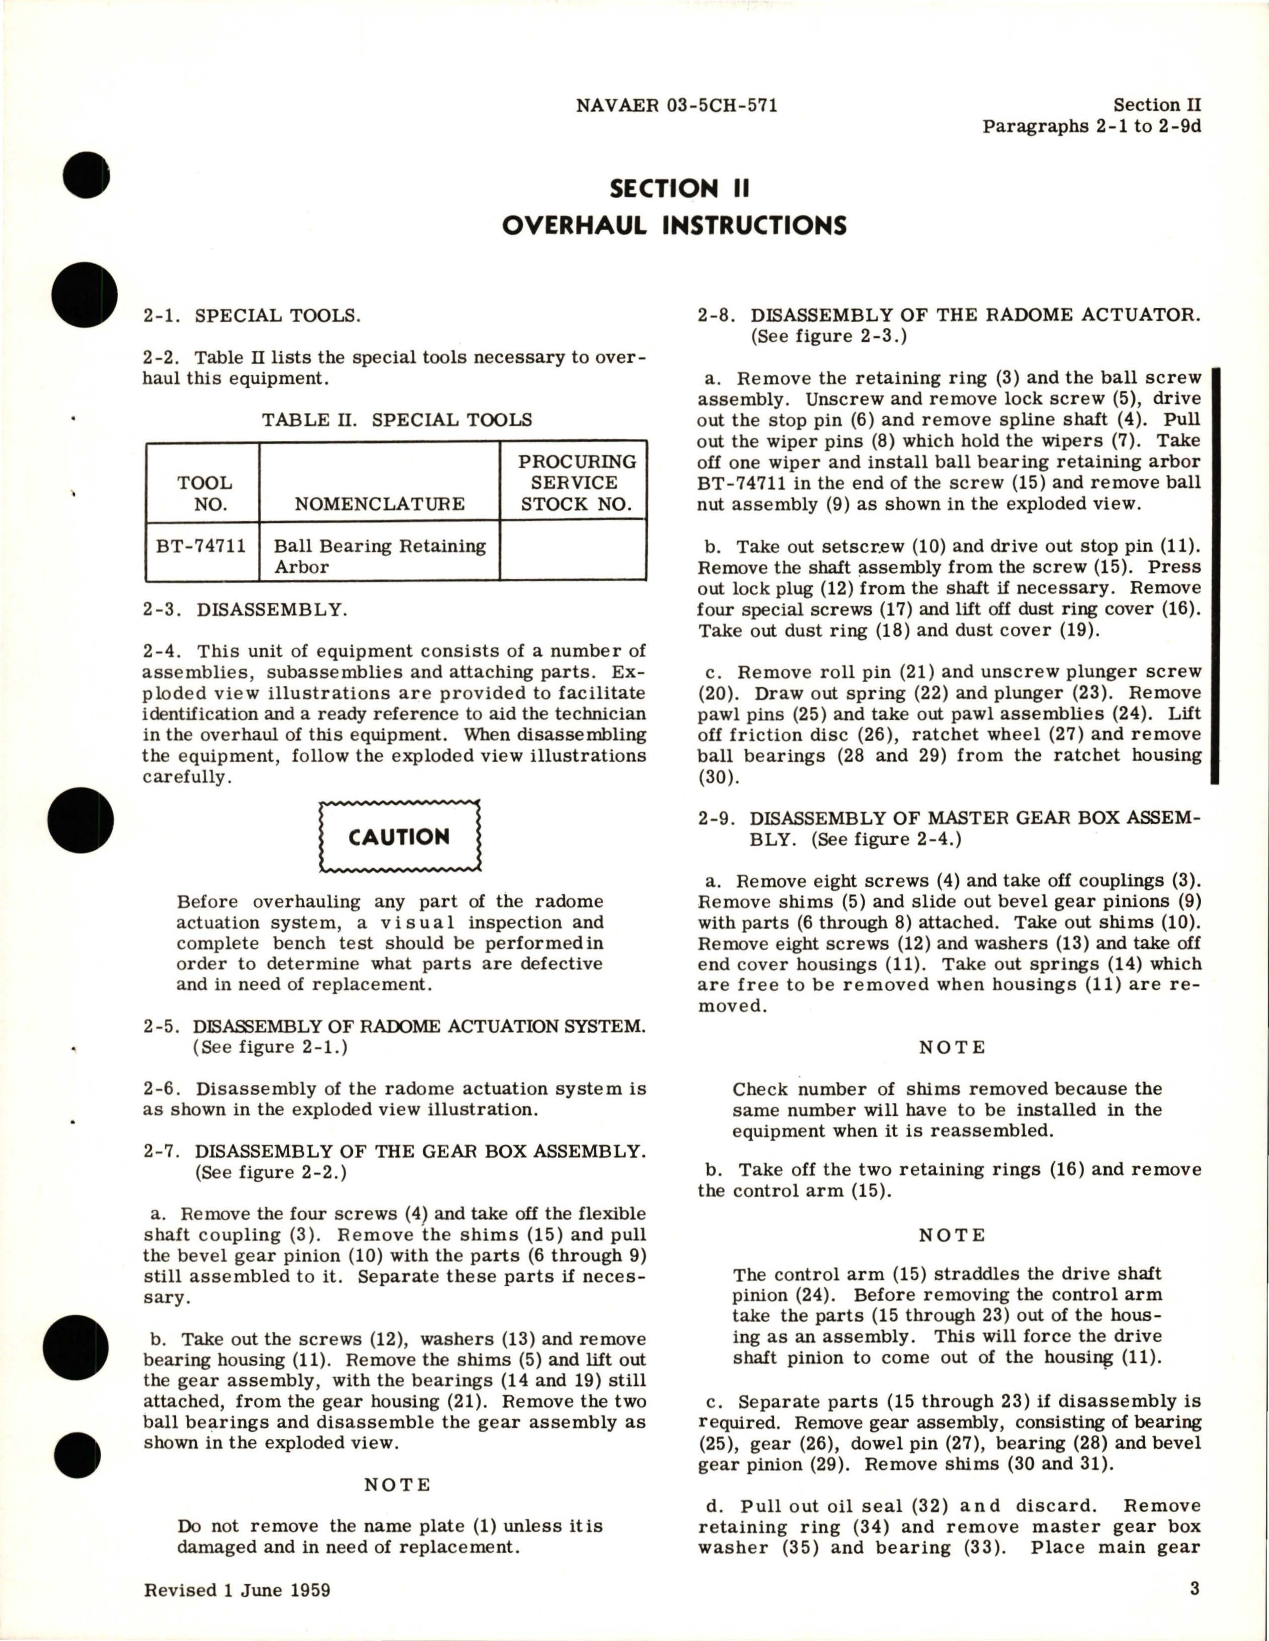 Sample page 7 from AirCorps Library document: Overhaul Instructions for Radome Actuation System - Model 26040 